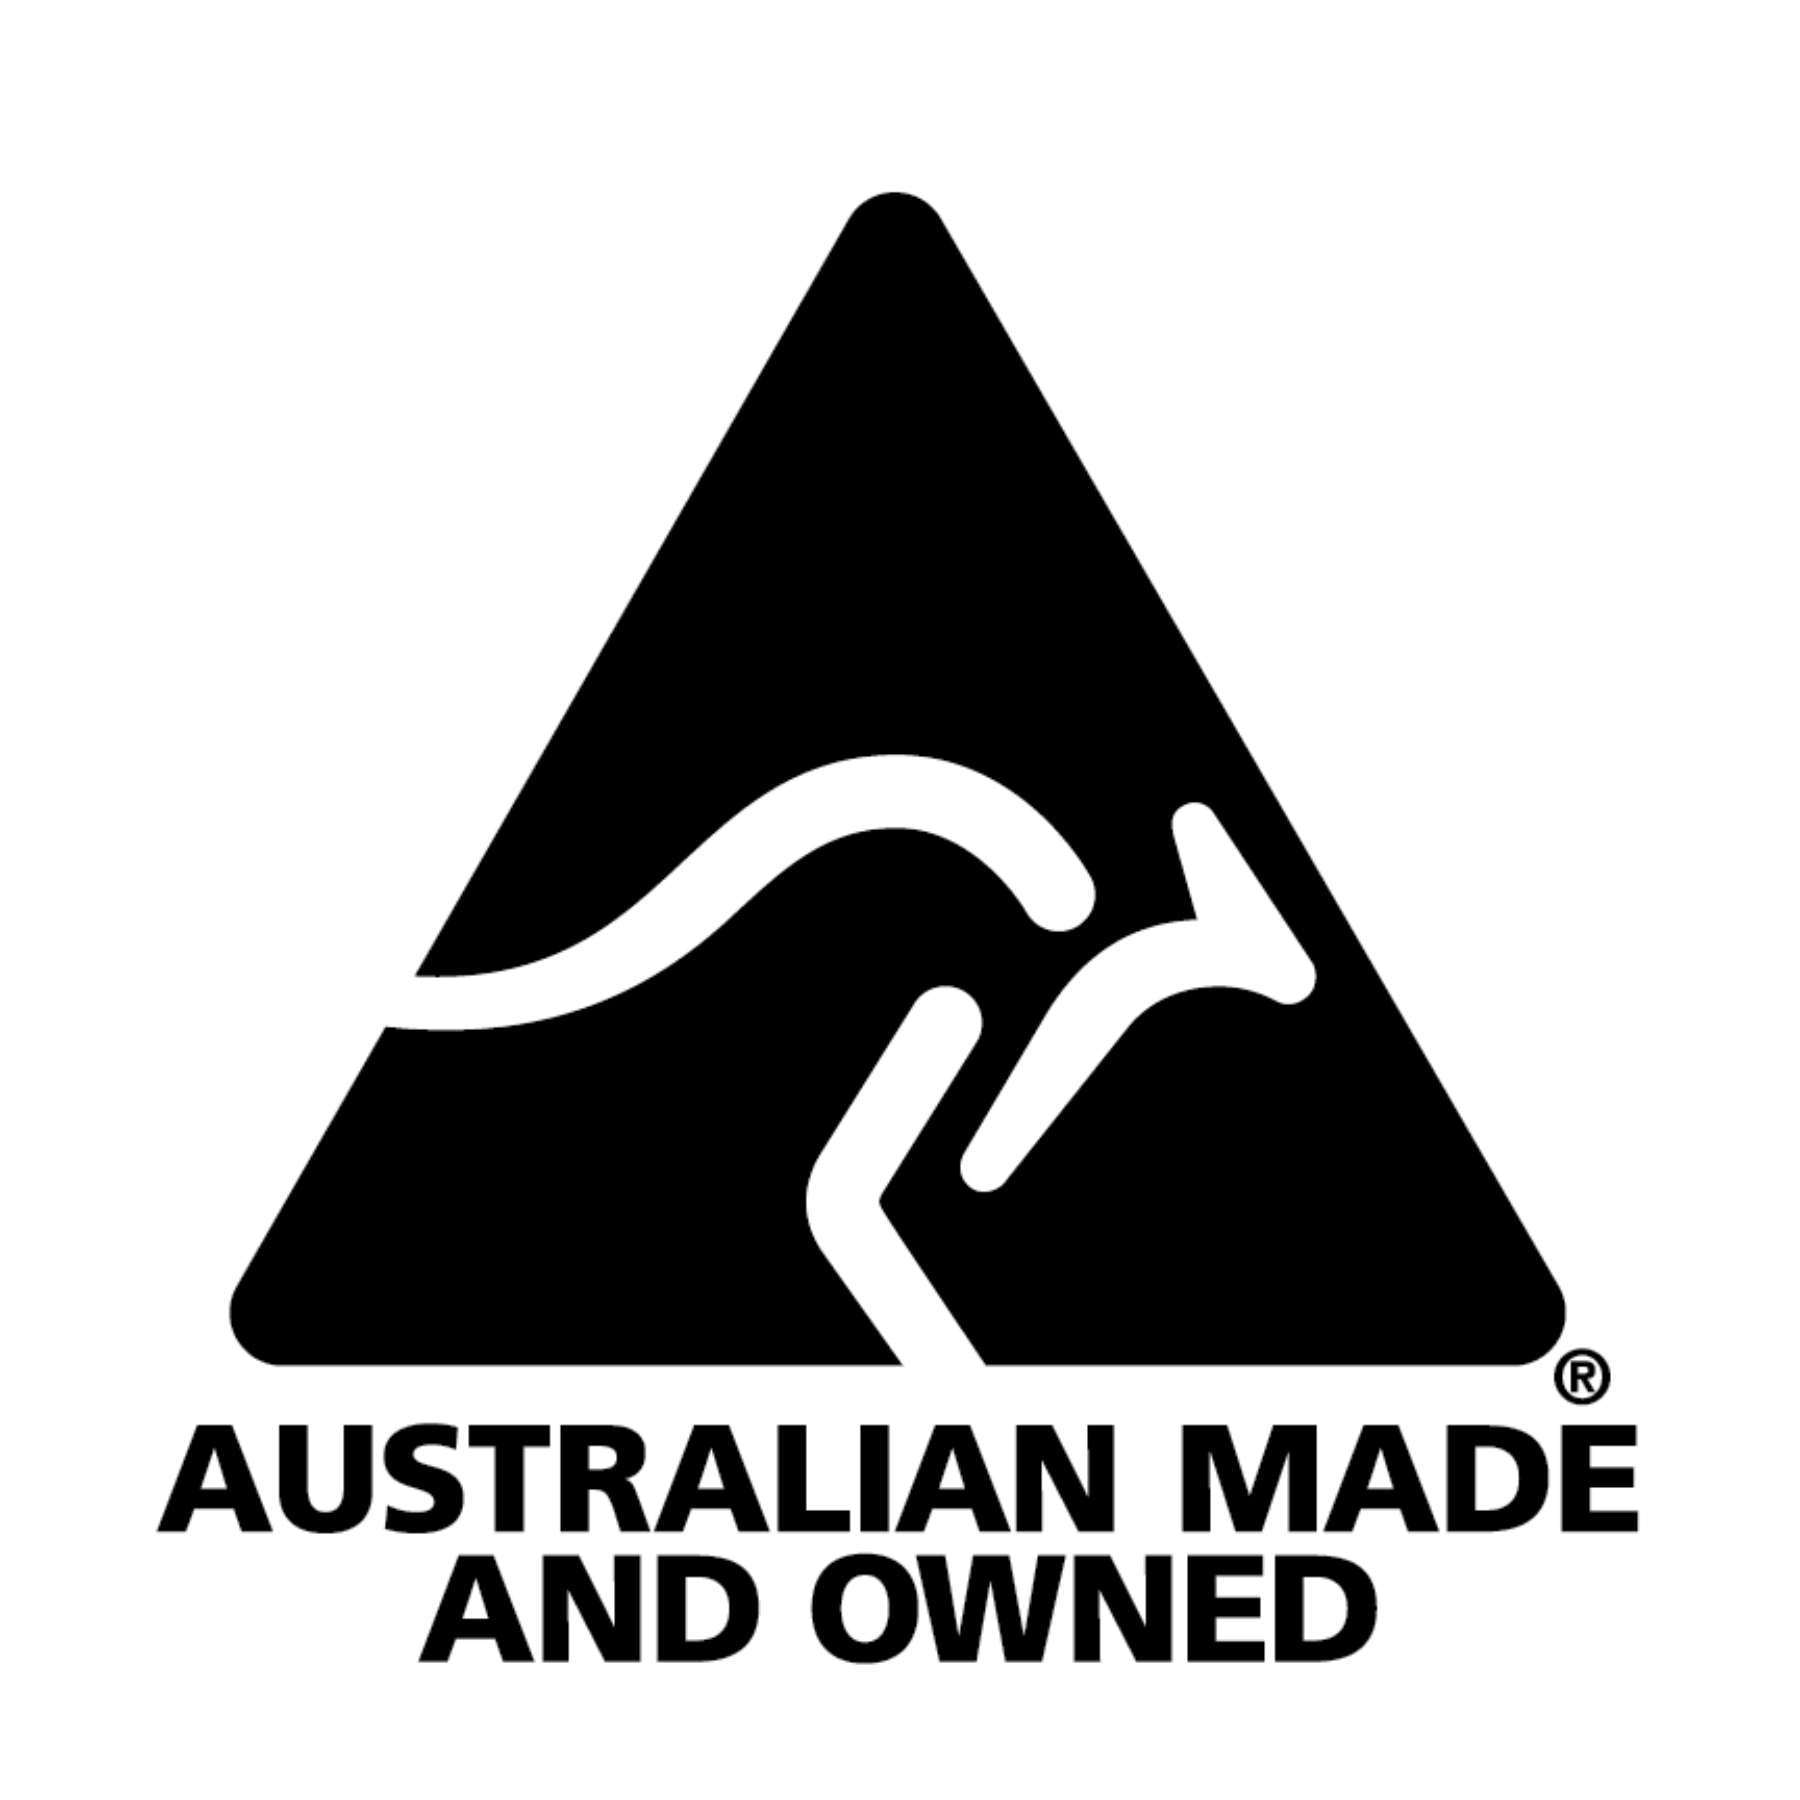 black and white australian owned and made logo